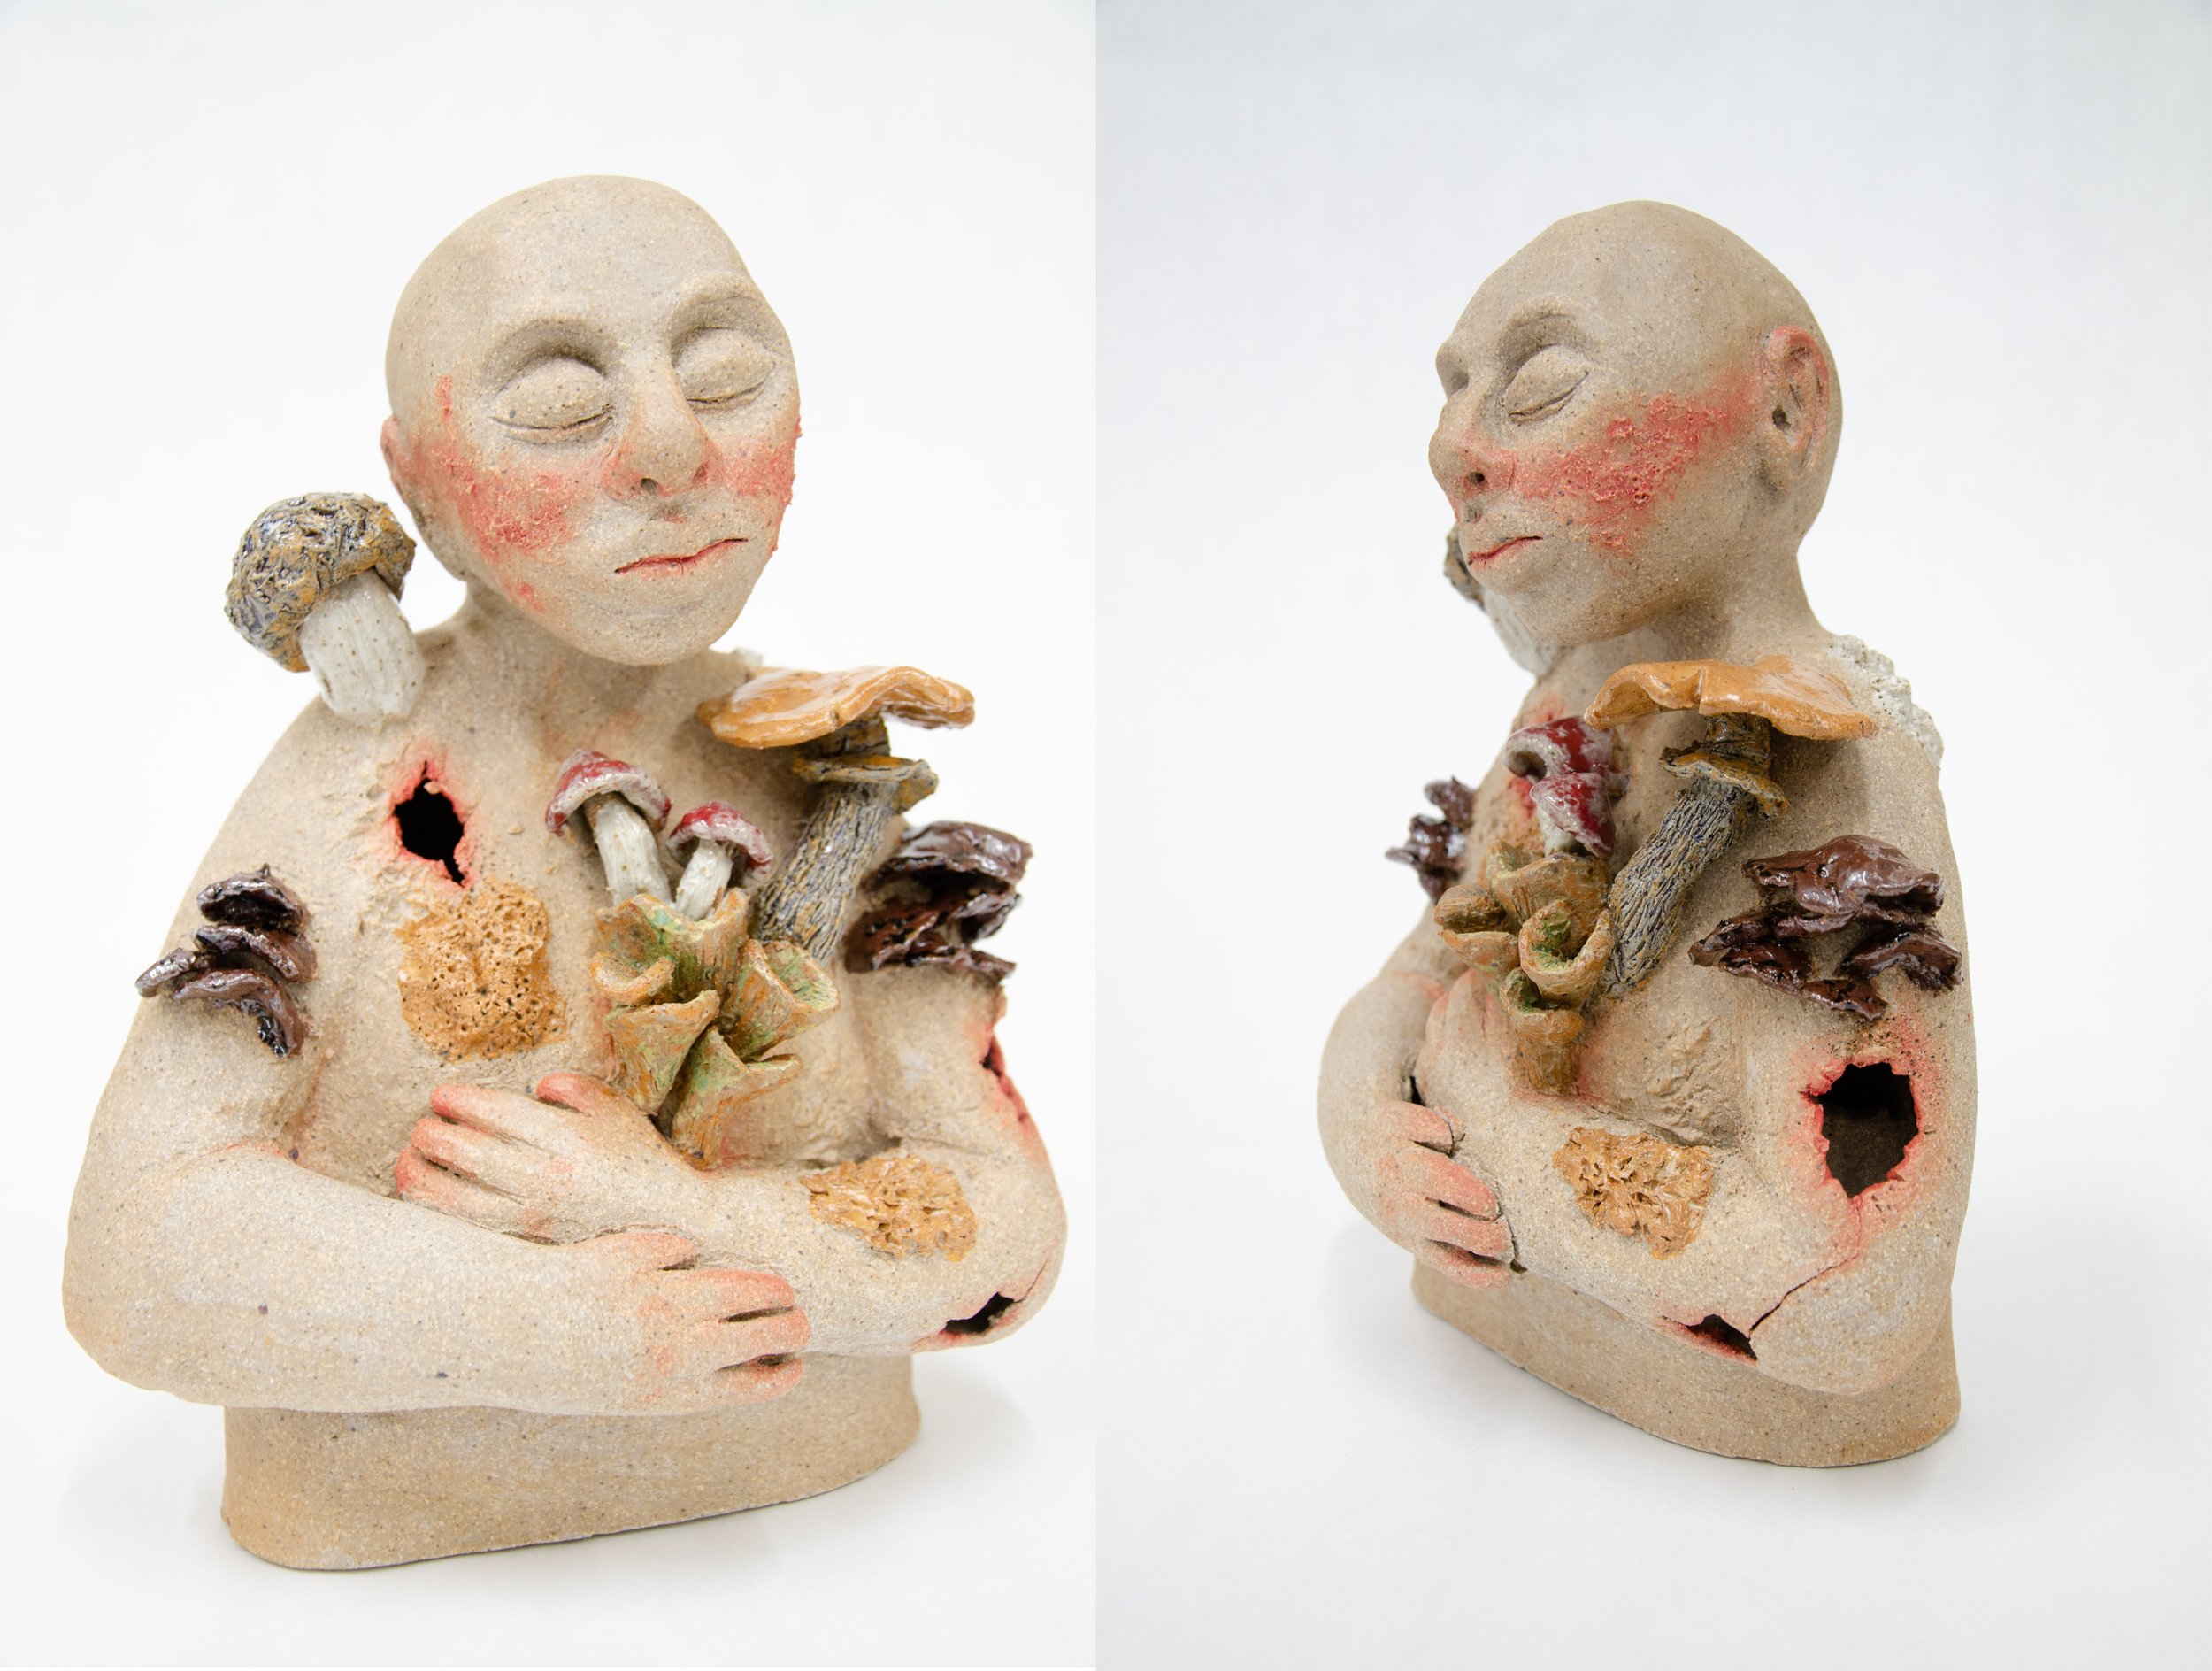  ANTARA KRISHNAN  Bloom  Ceramic  ArtNow 2022 Brave New Worlds 2nd Place Sculpture  Grade 12  Westmont High School  Instructor: Rachel Ashman   ”I created this piece to symbolize the decay and acceptance of my fears. I take inspiration from our vibra